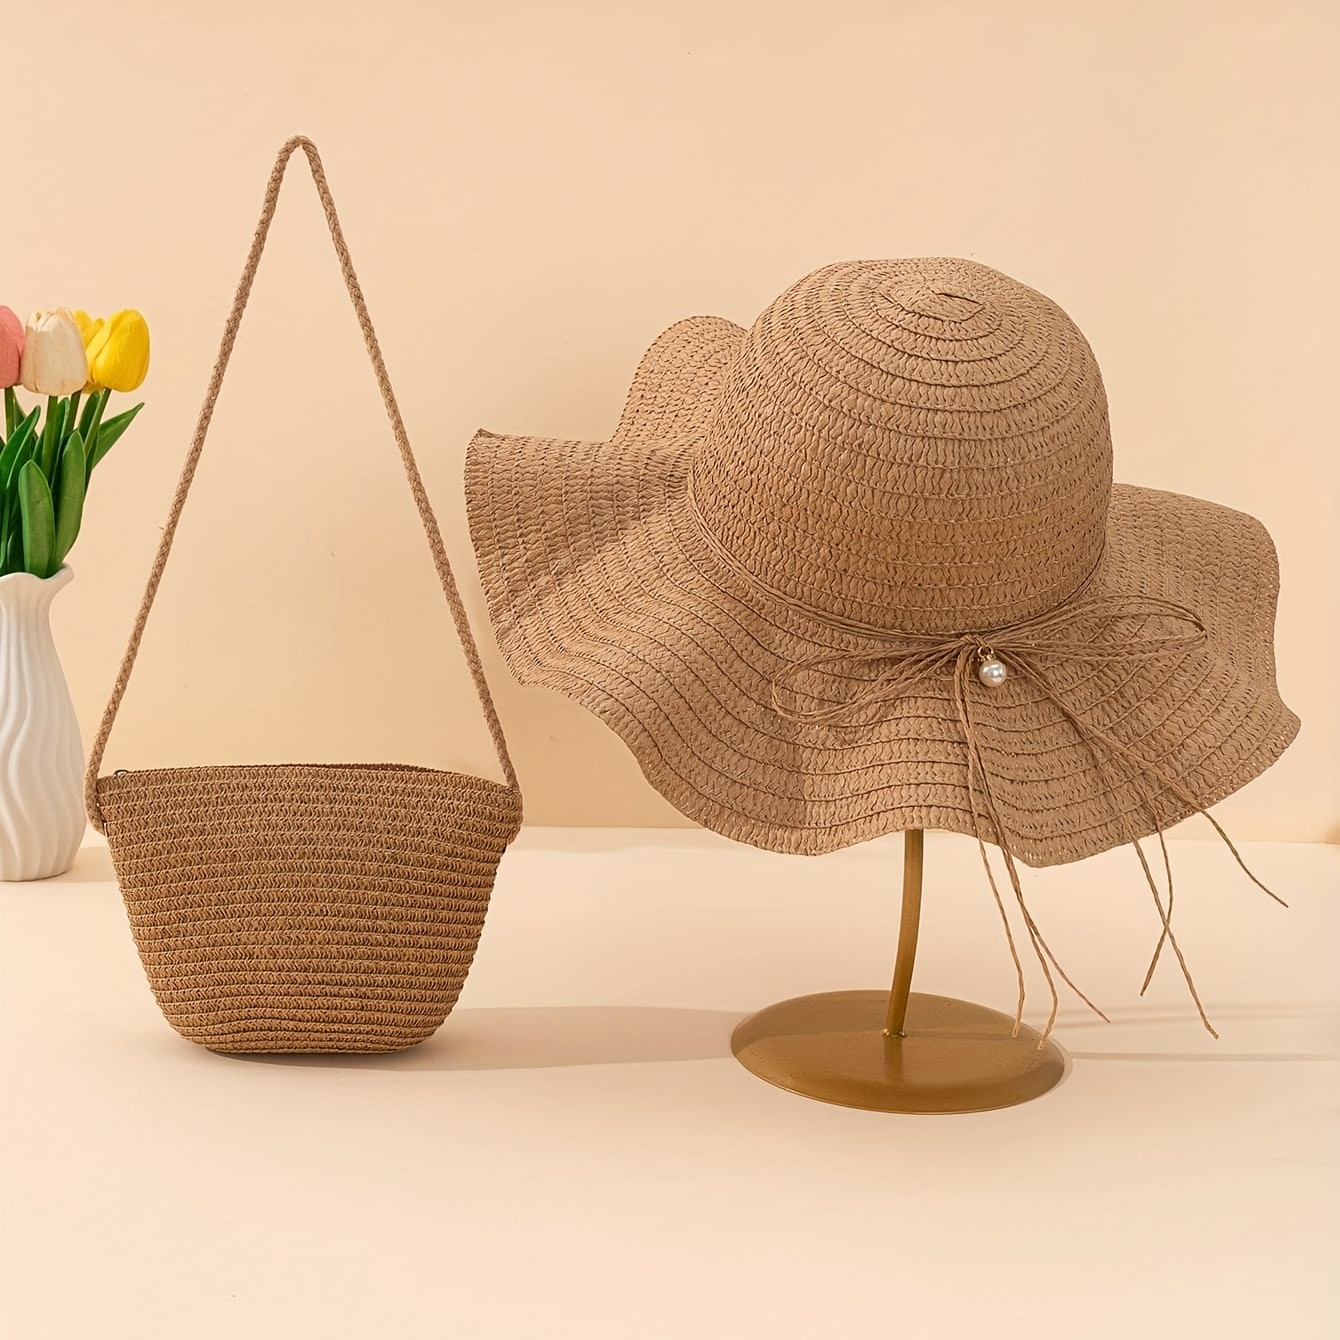 

Look Chic & Feel Cool: Solid Color Woven Straw Hat & Bag Set With Faux Pearl Bow Decor For Beach Vacation